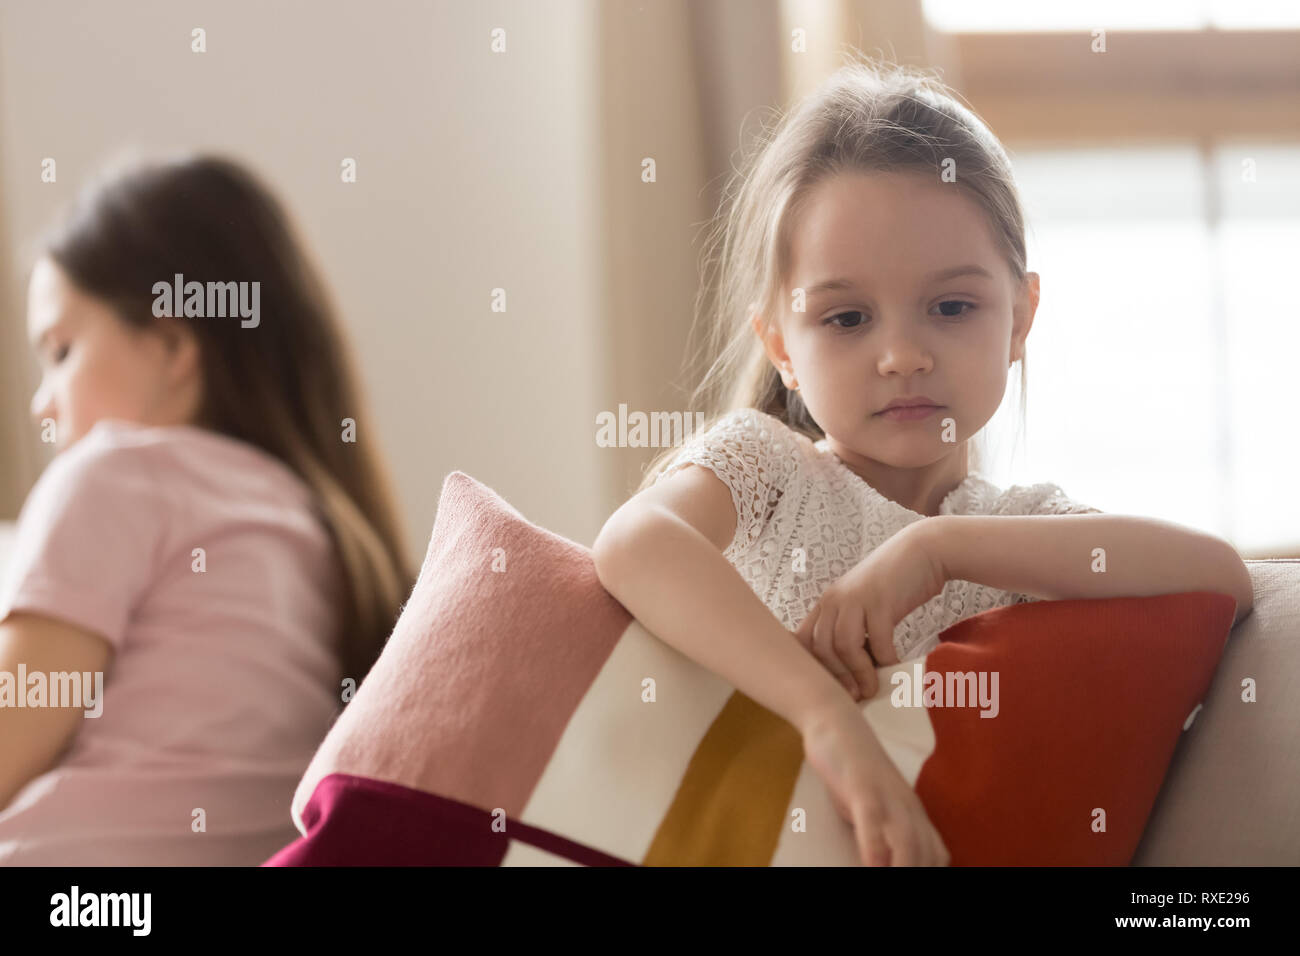 Upset kid daughter feeling sad after fight with mother Stock Photo